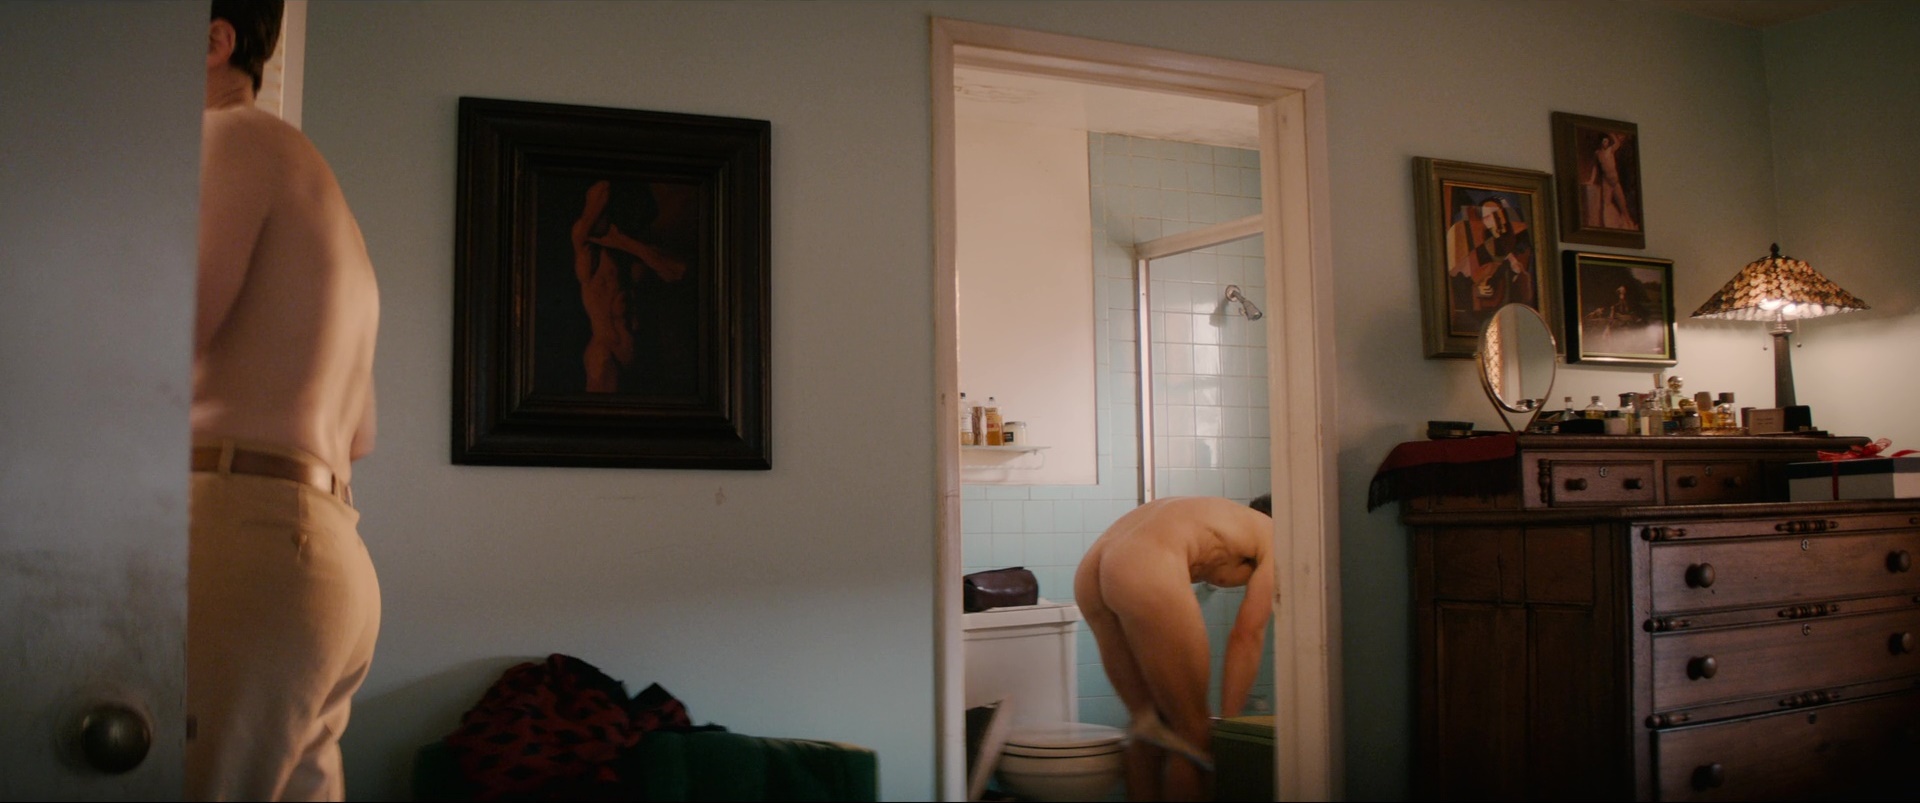 Matthew Bomer naked in 'The Boys In The Band' .